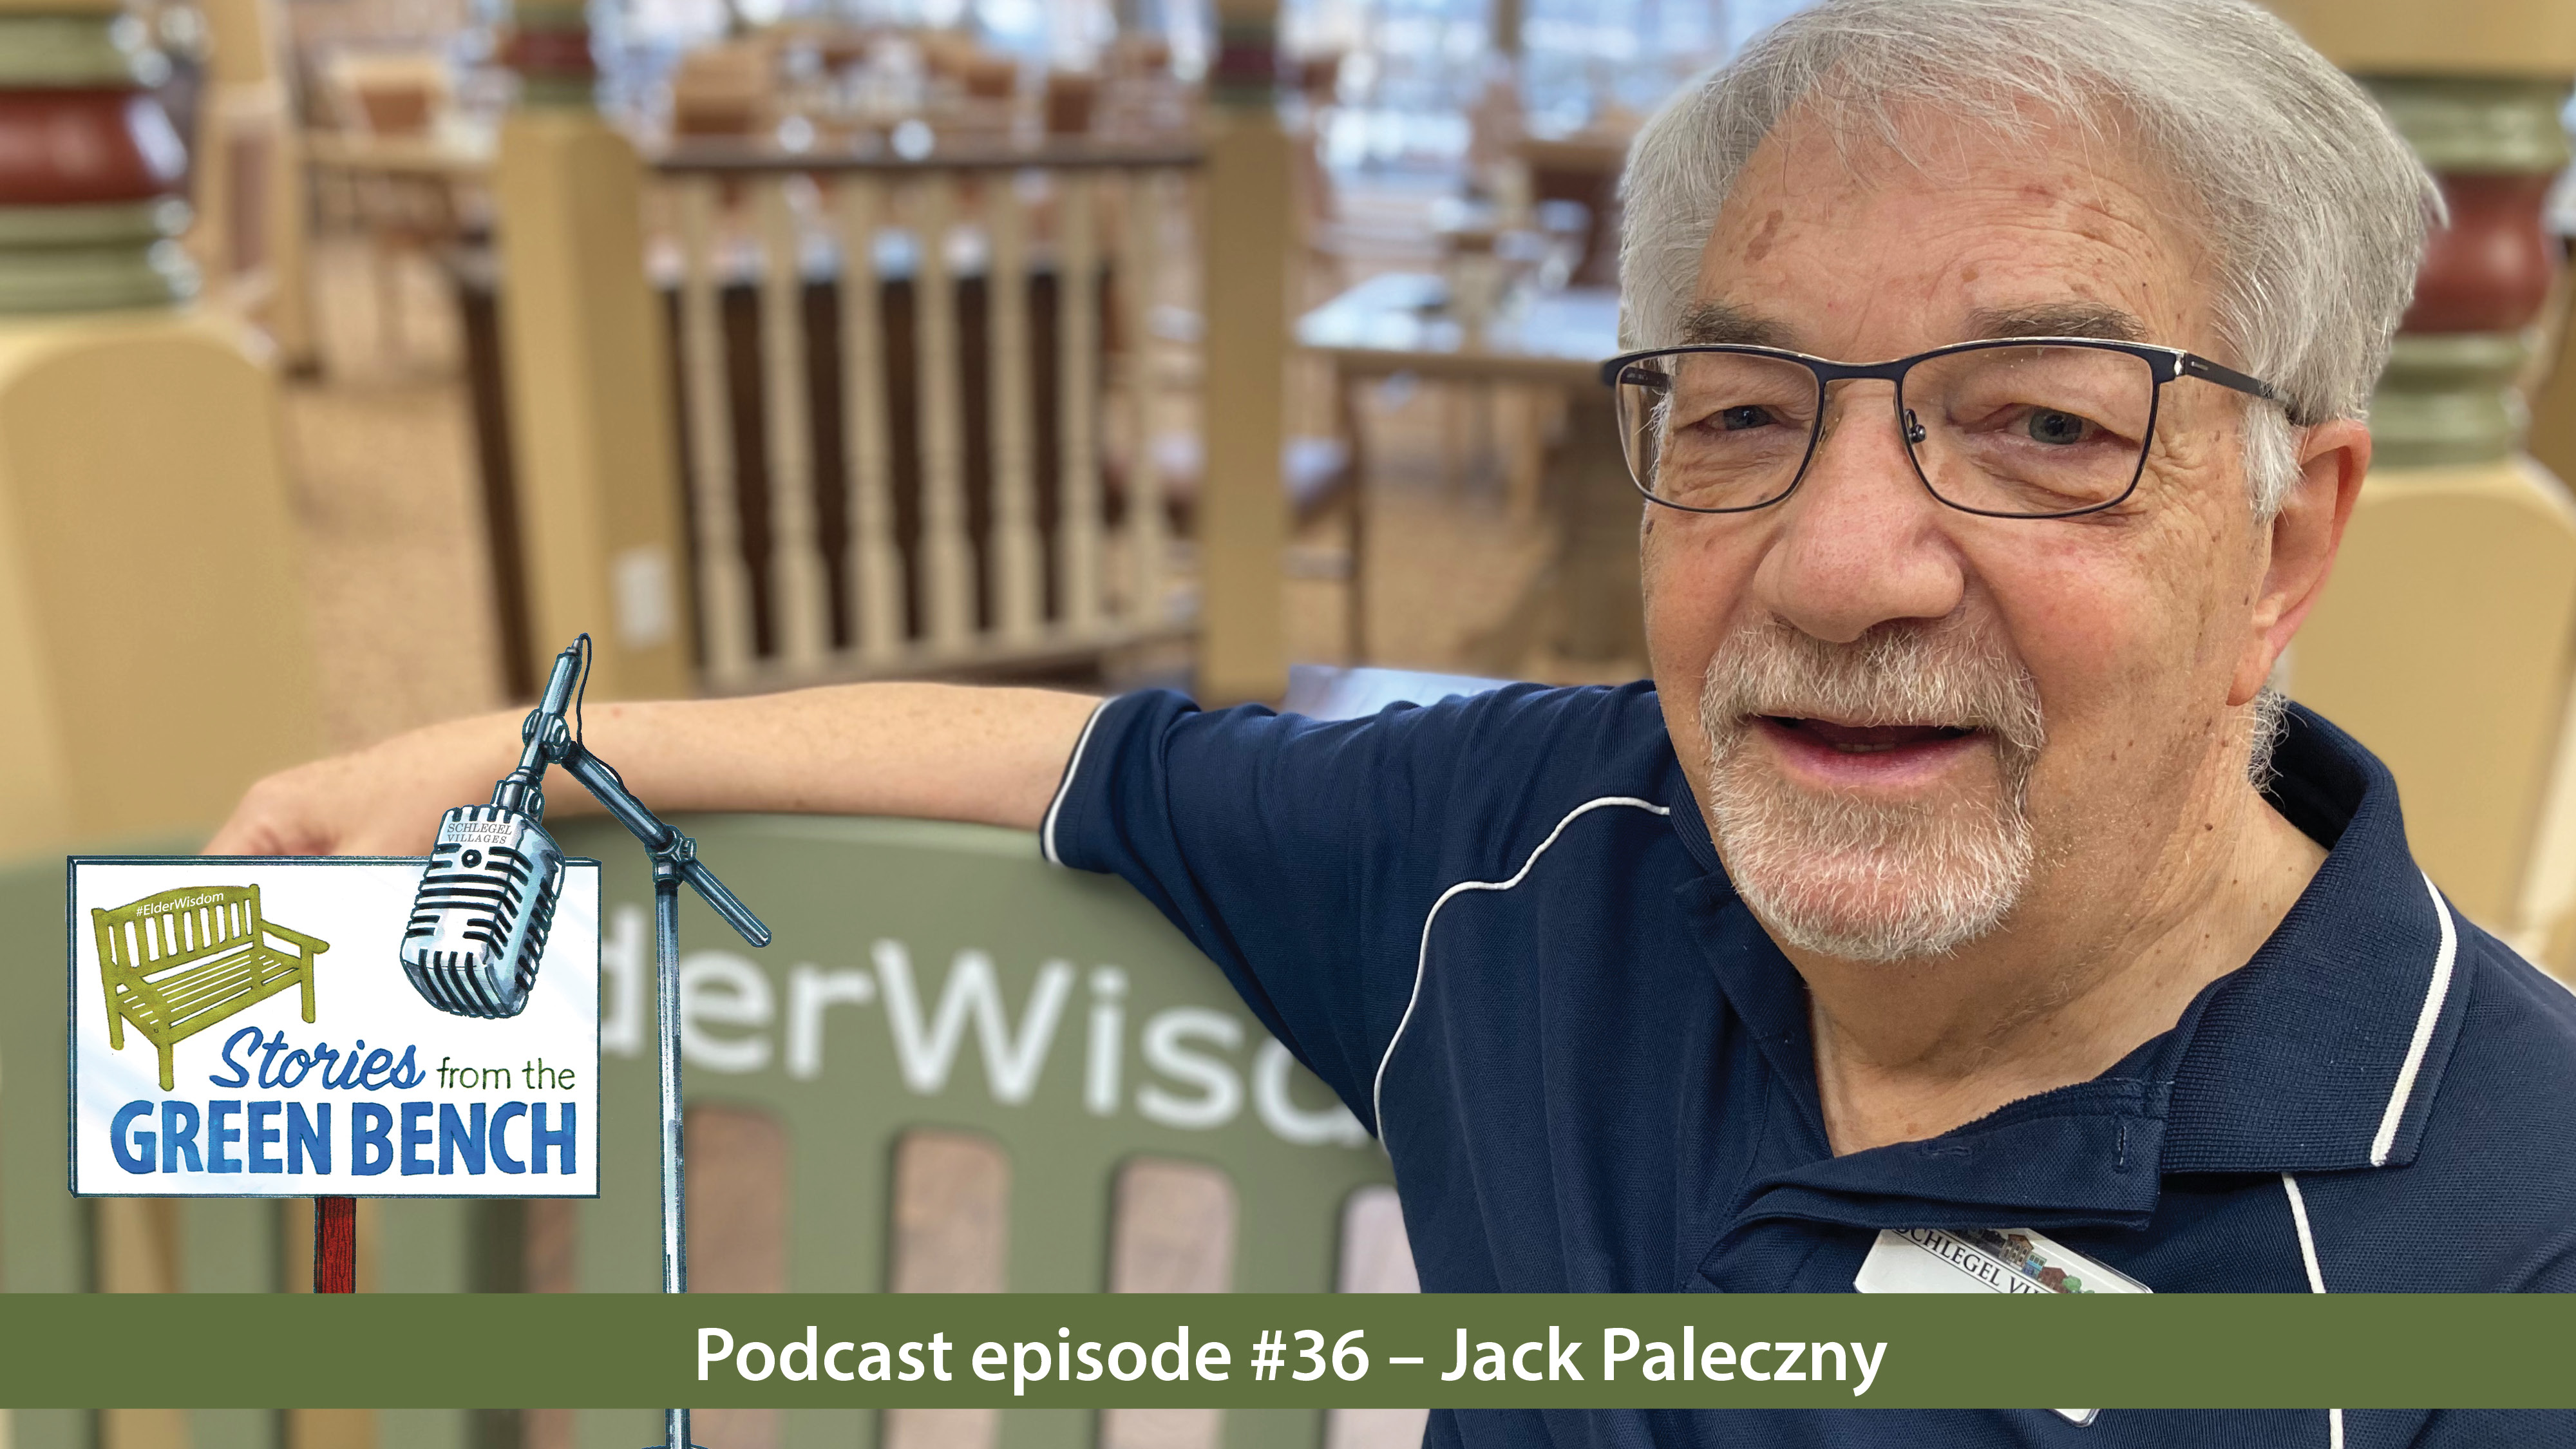 Jack Paleczny shares his Story from the Green Bench on the #ElderWisdom podcast